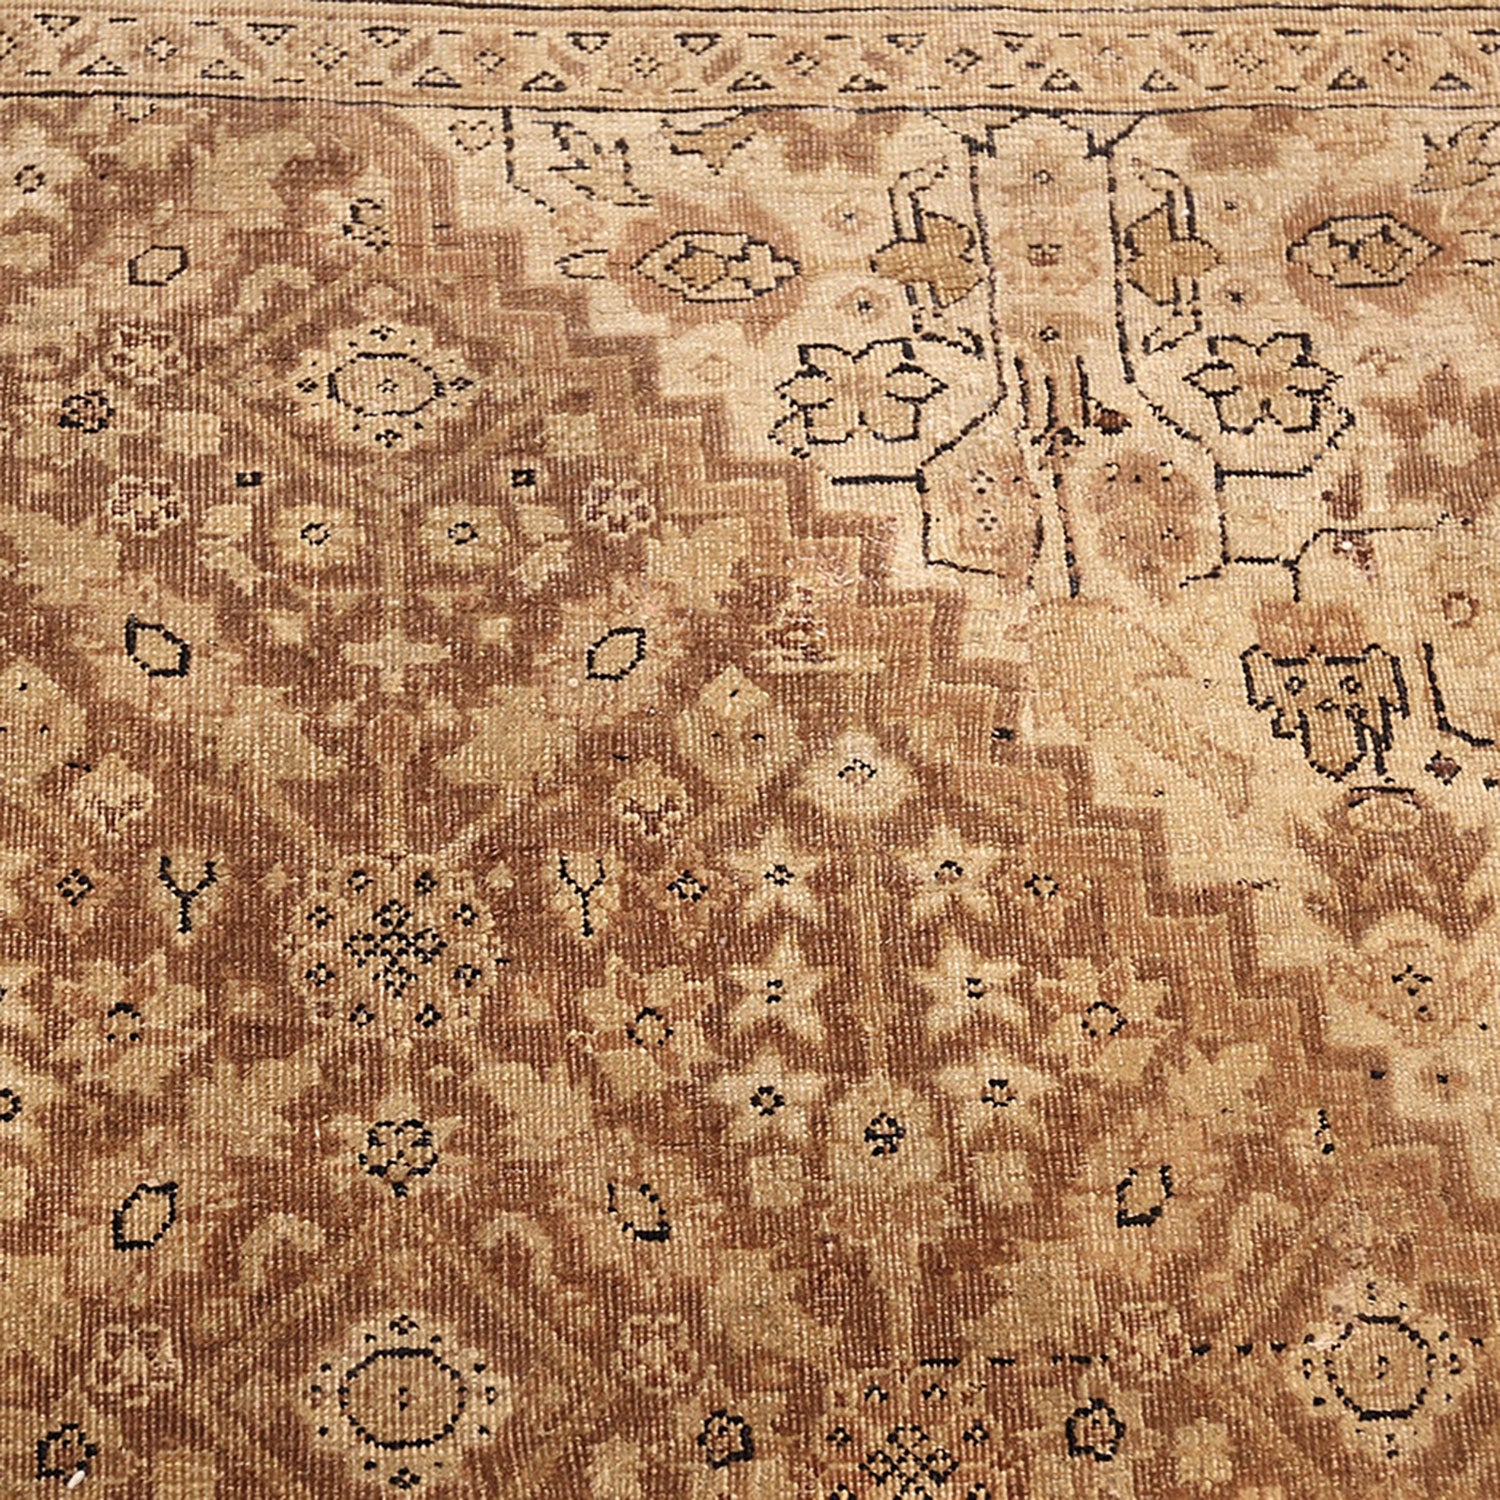 An intricately patterned, high-quality rug in warm shades of brown.